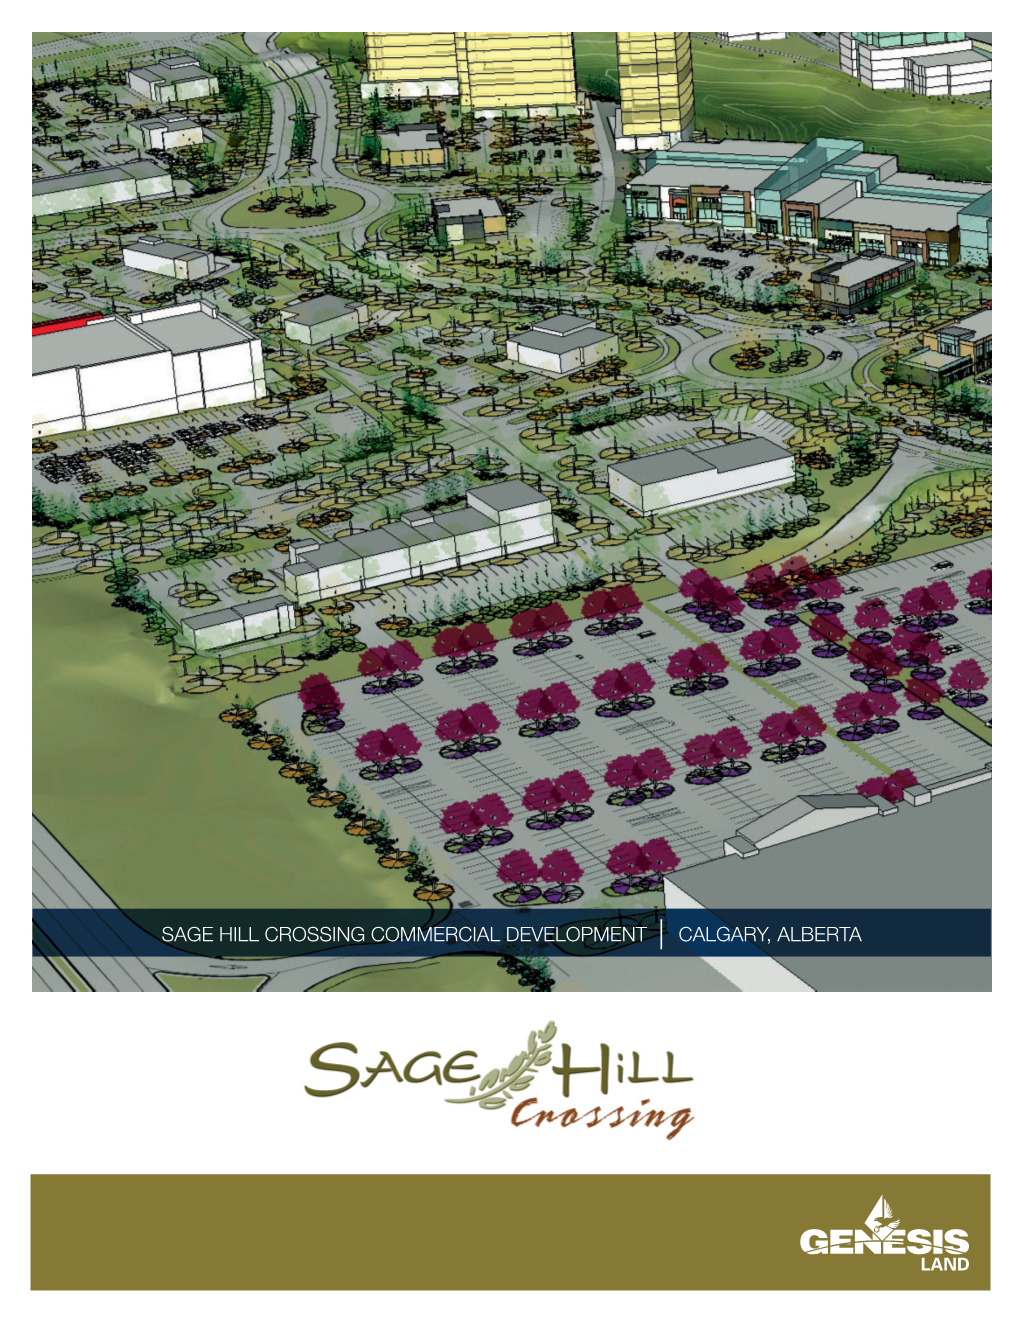 Sage Hill Crossing Commercial Development